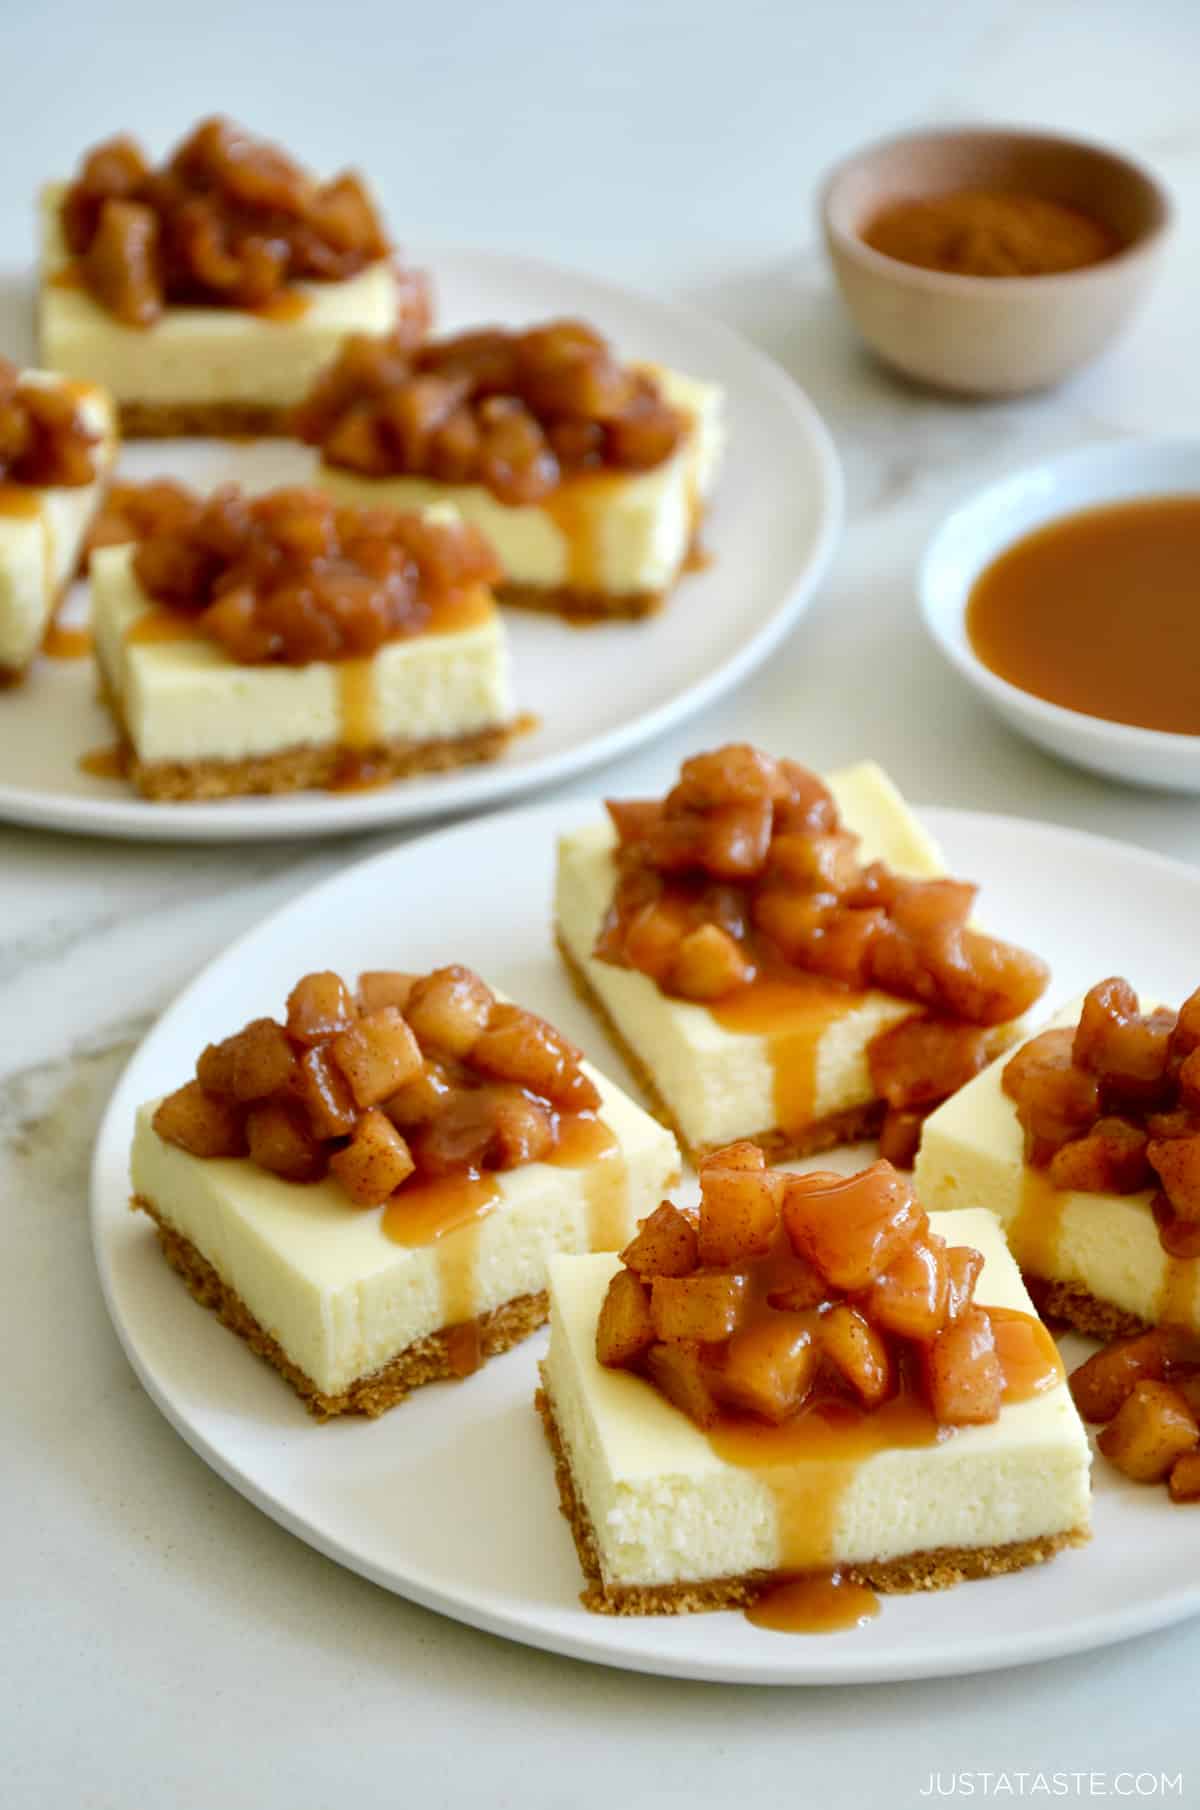 Two plates each with four cheesecake bars, topped with sauteed apples and caramel sauce.